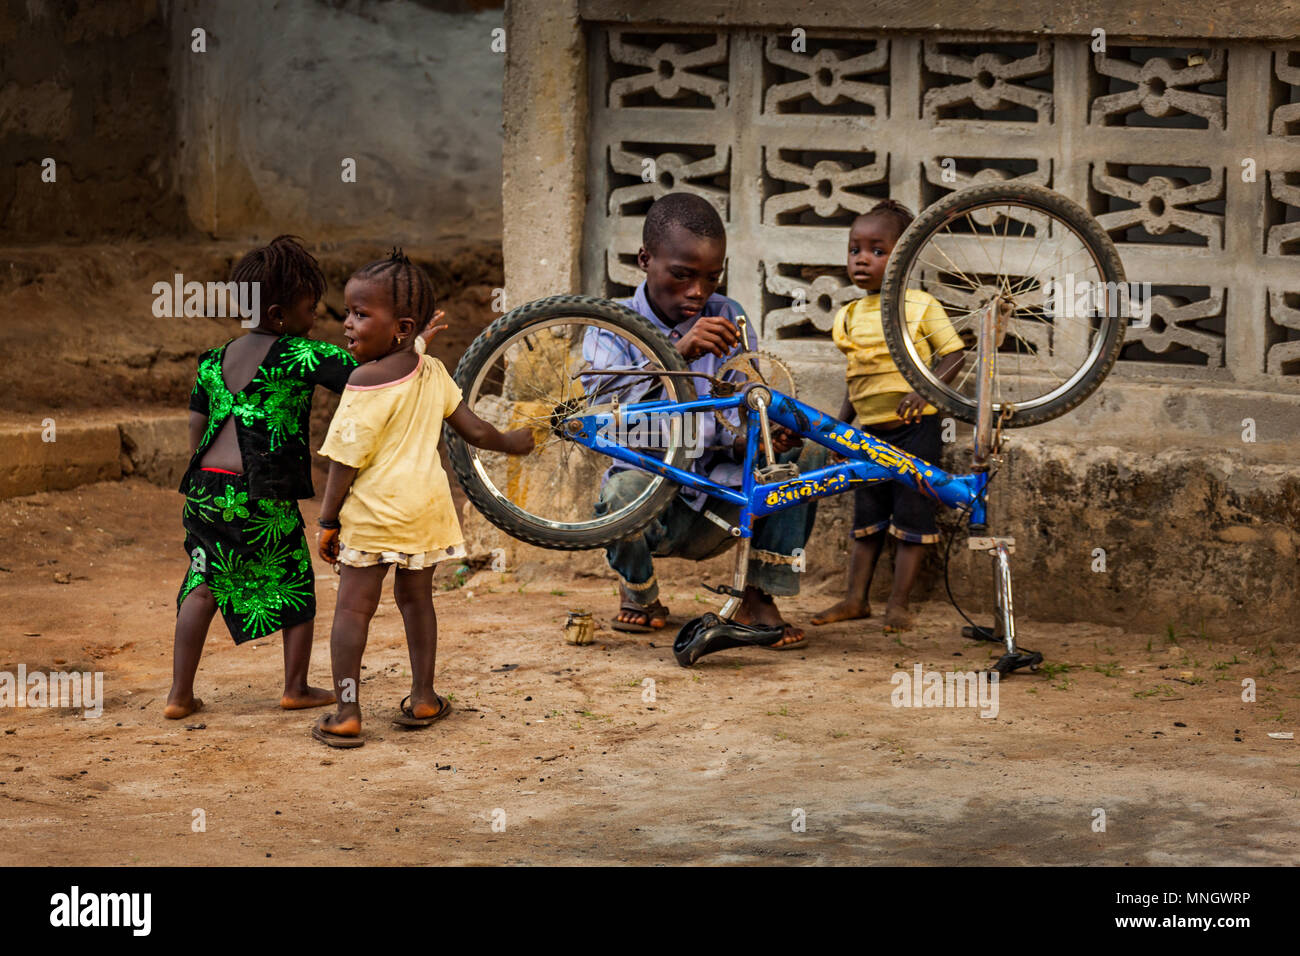 Yongoro, Sierra Leone - June 03, 2013: West Africa, unknown man with children repairs a bicycle in the village in front of the capital Freetown, SIerr Stock Photo